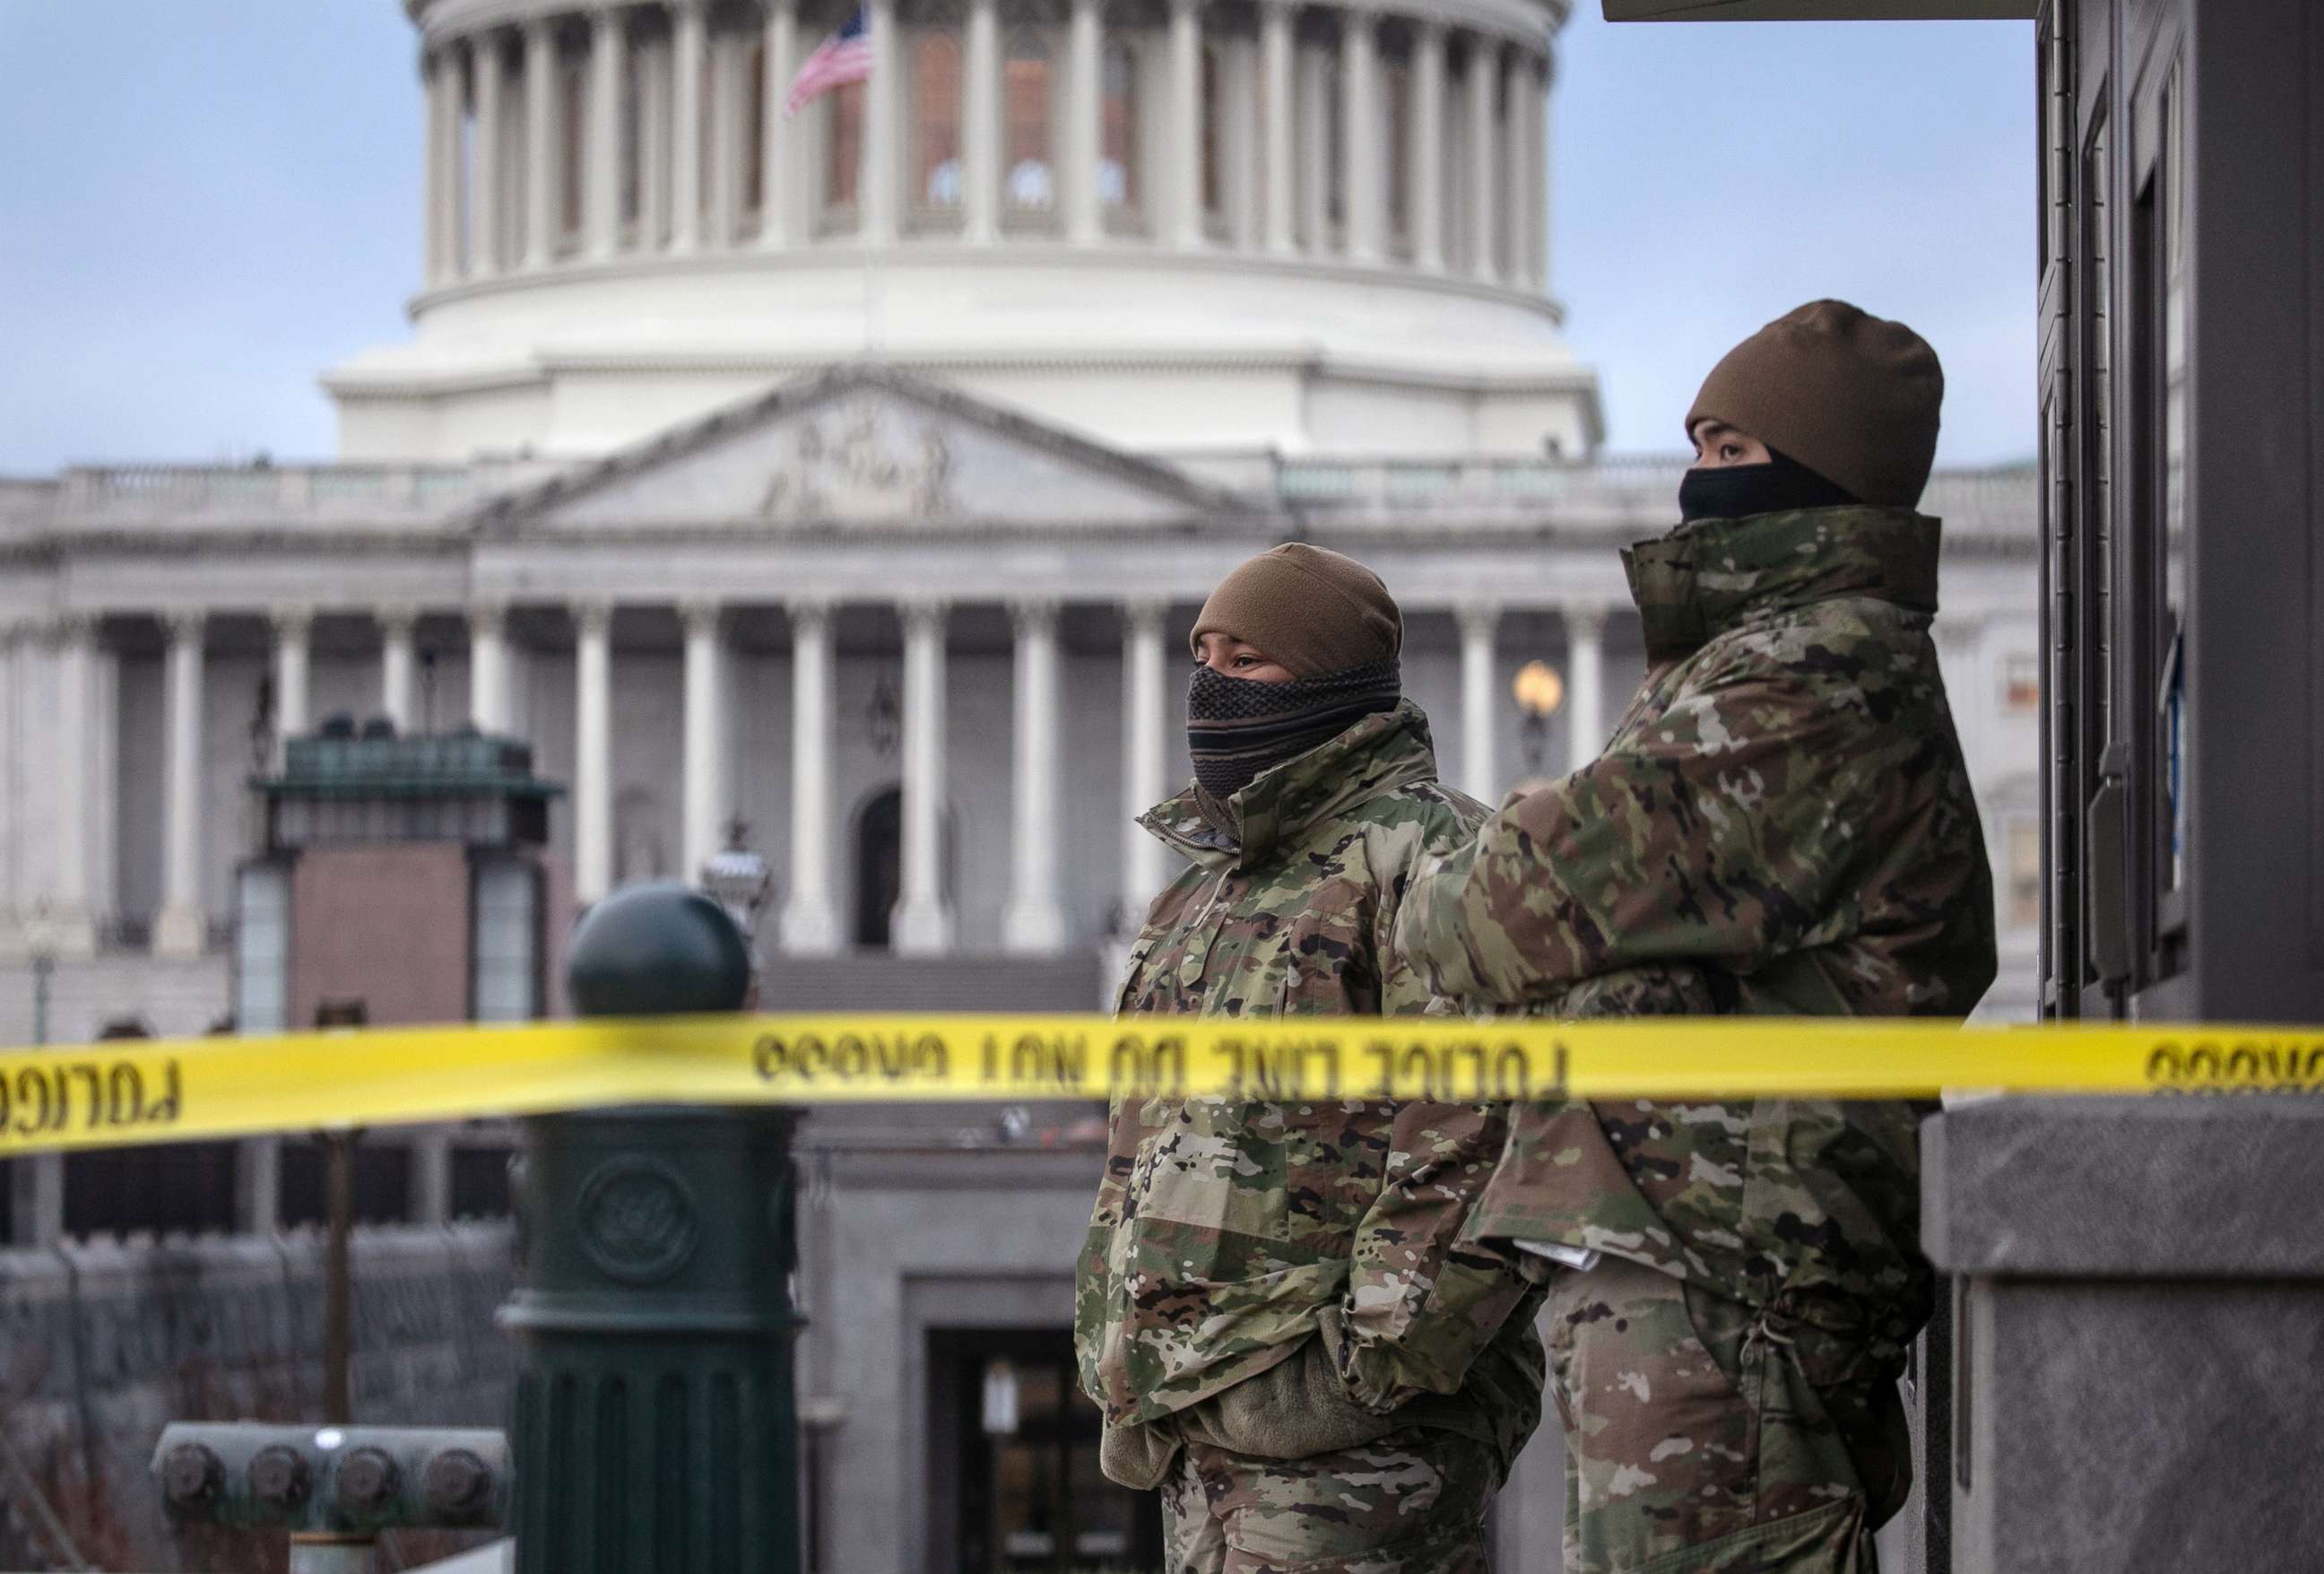 PHOTO: D.C. National Guard troops stand watch at the U.S. Capitol on Jan. 8, 2021, in Washington, D.C.